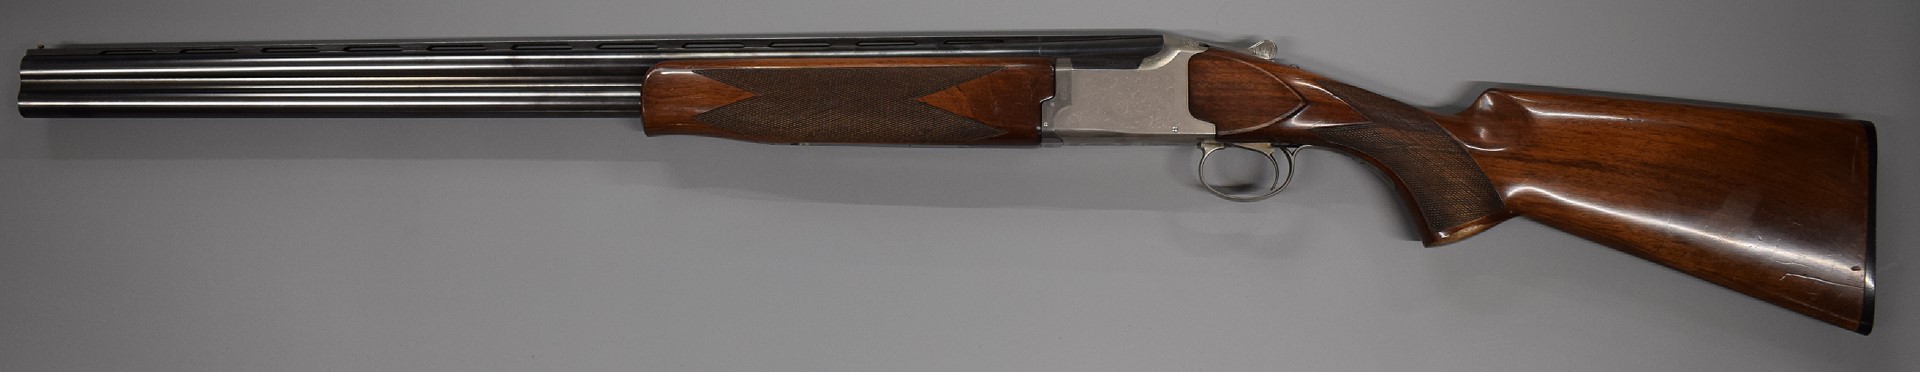 Winchester 5000 Field 12 bore over and under shotgun with engraved locks and trigger guard, single - Image 3 of 8